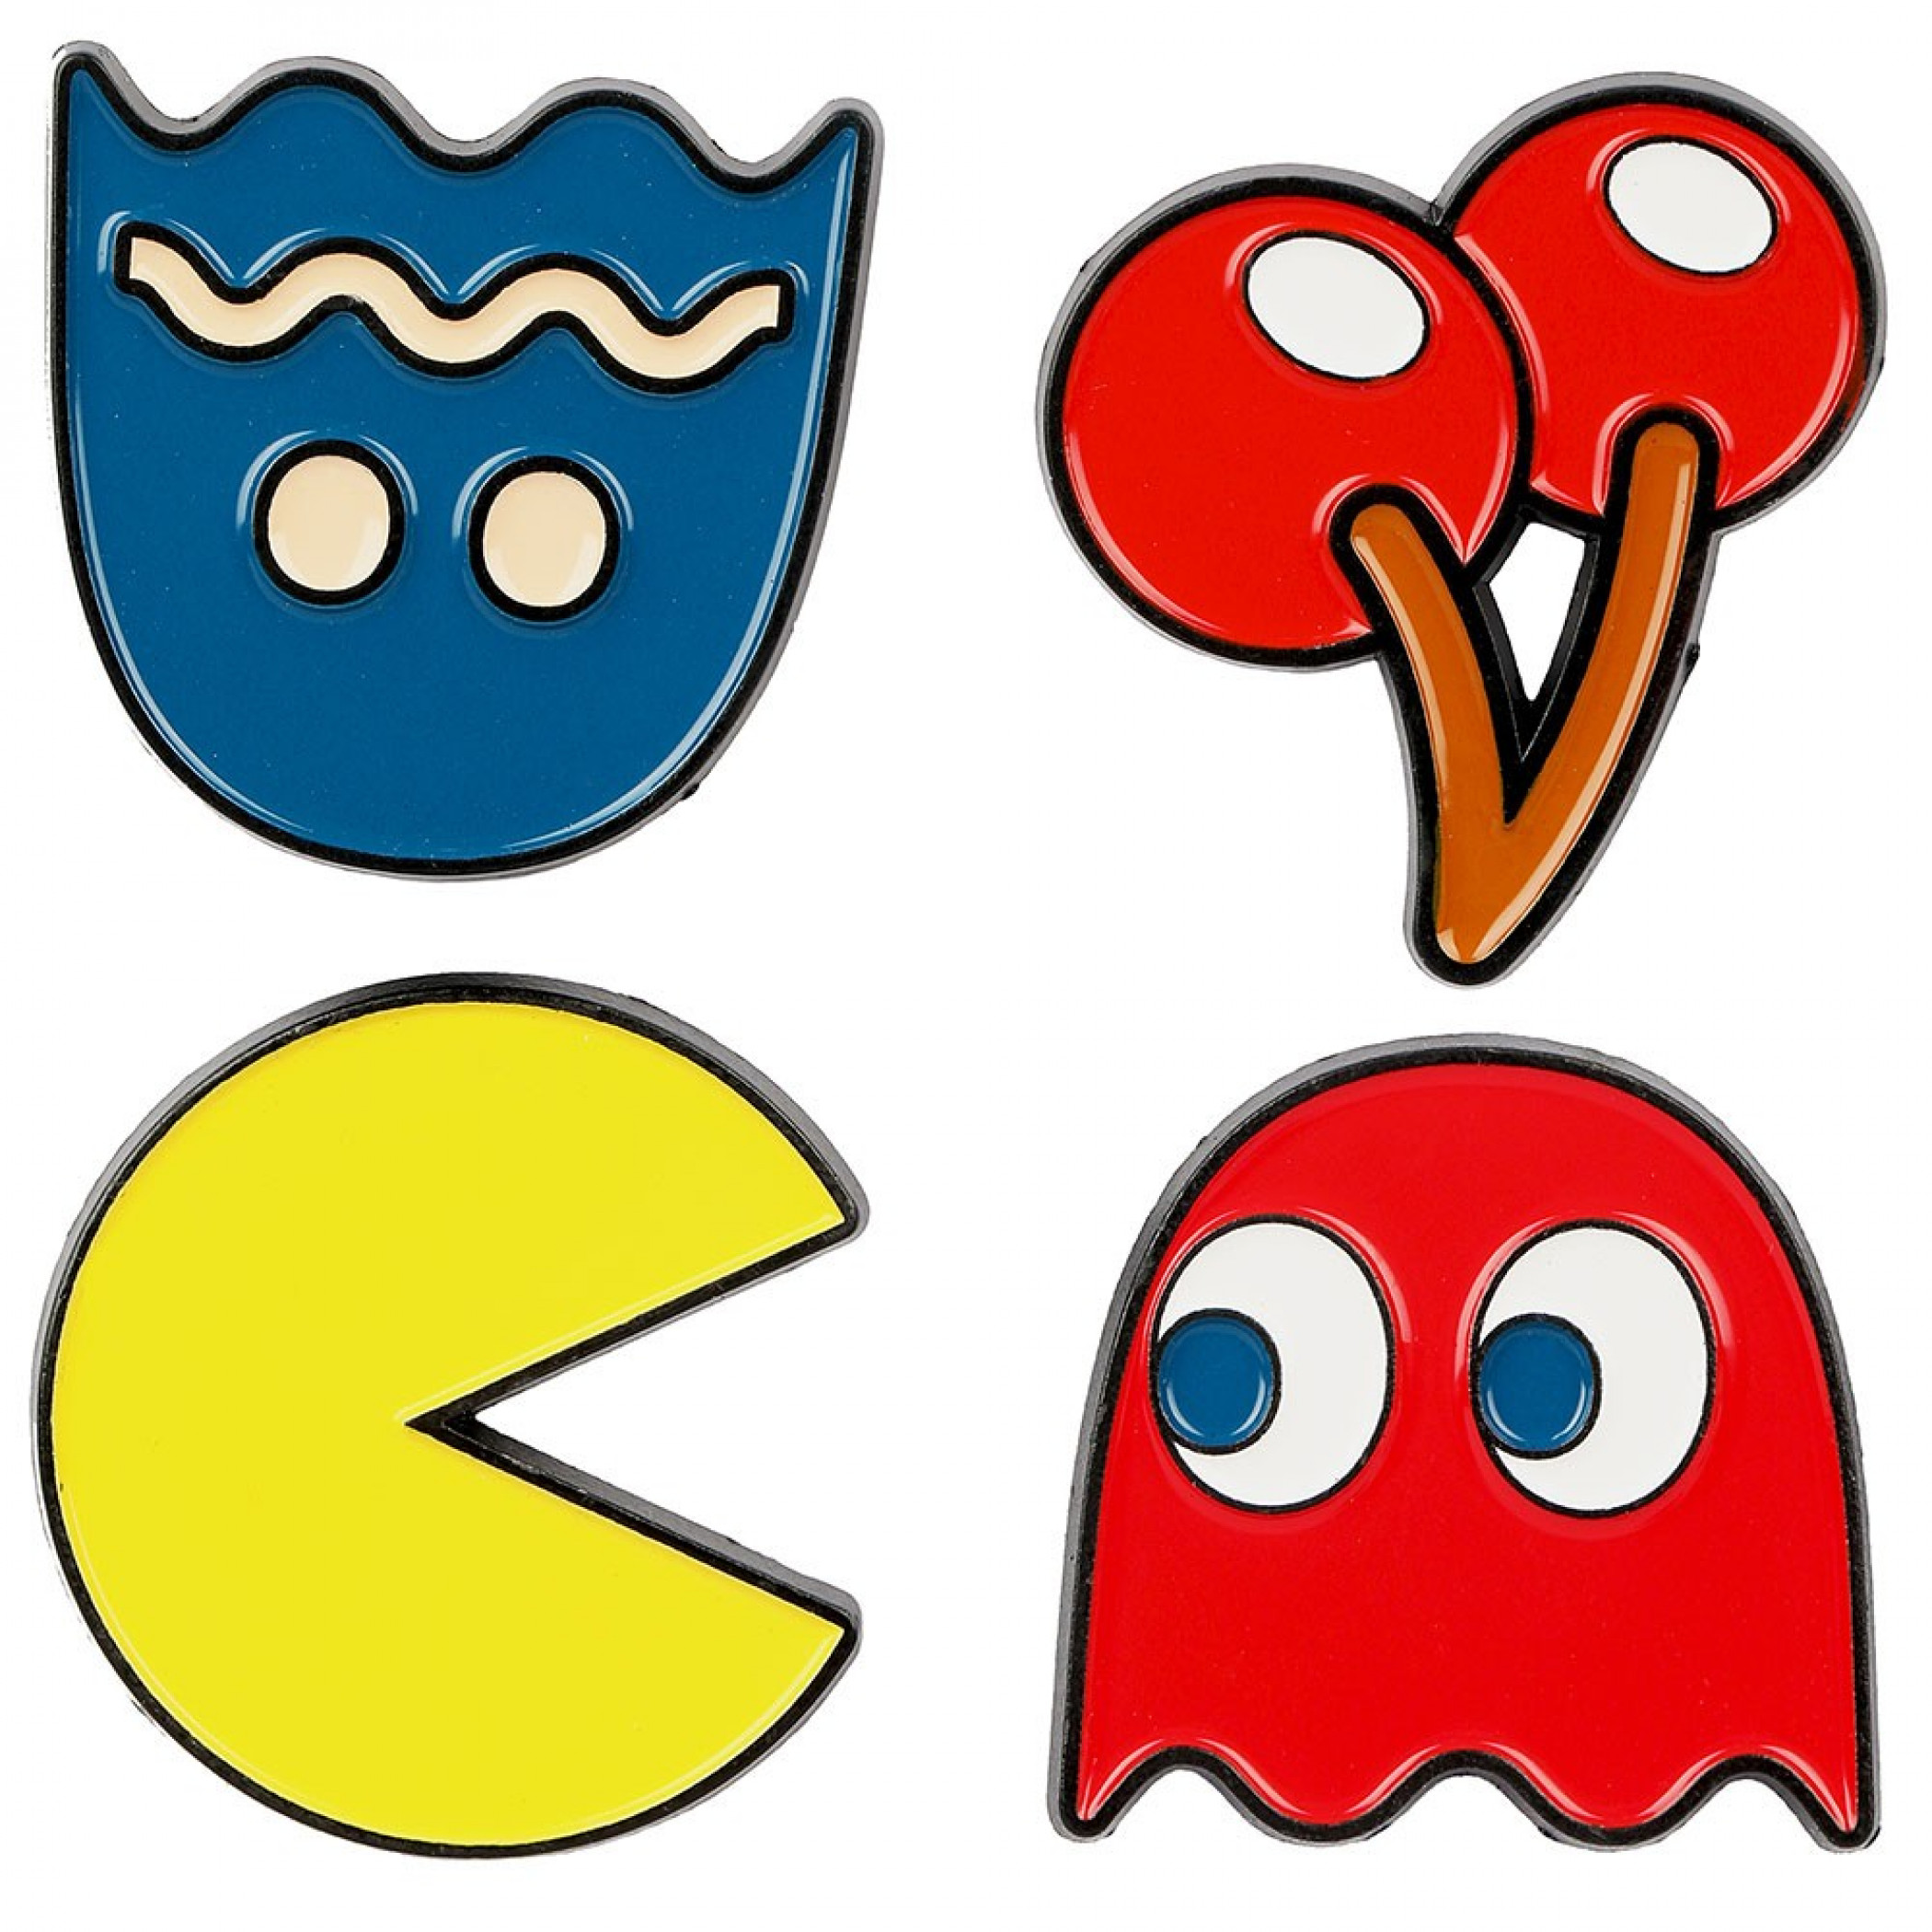 Pac-Man 4-Pack of Collectible Lapel Pins